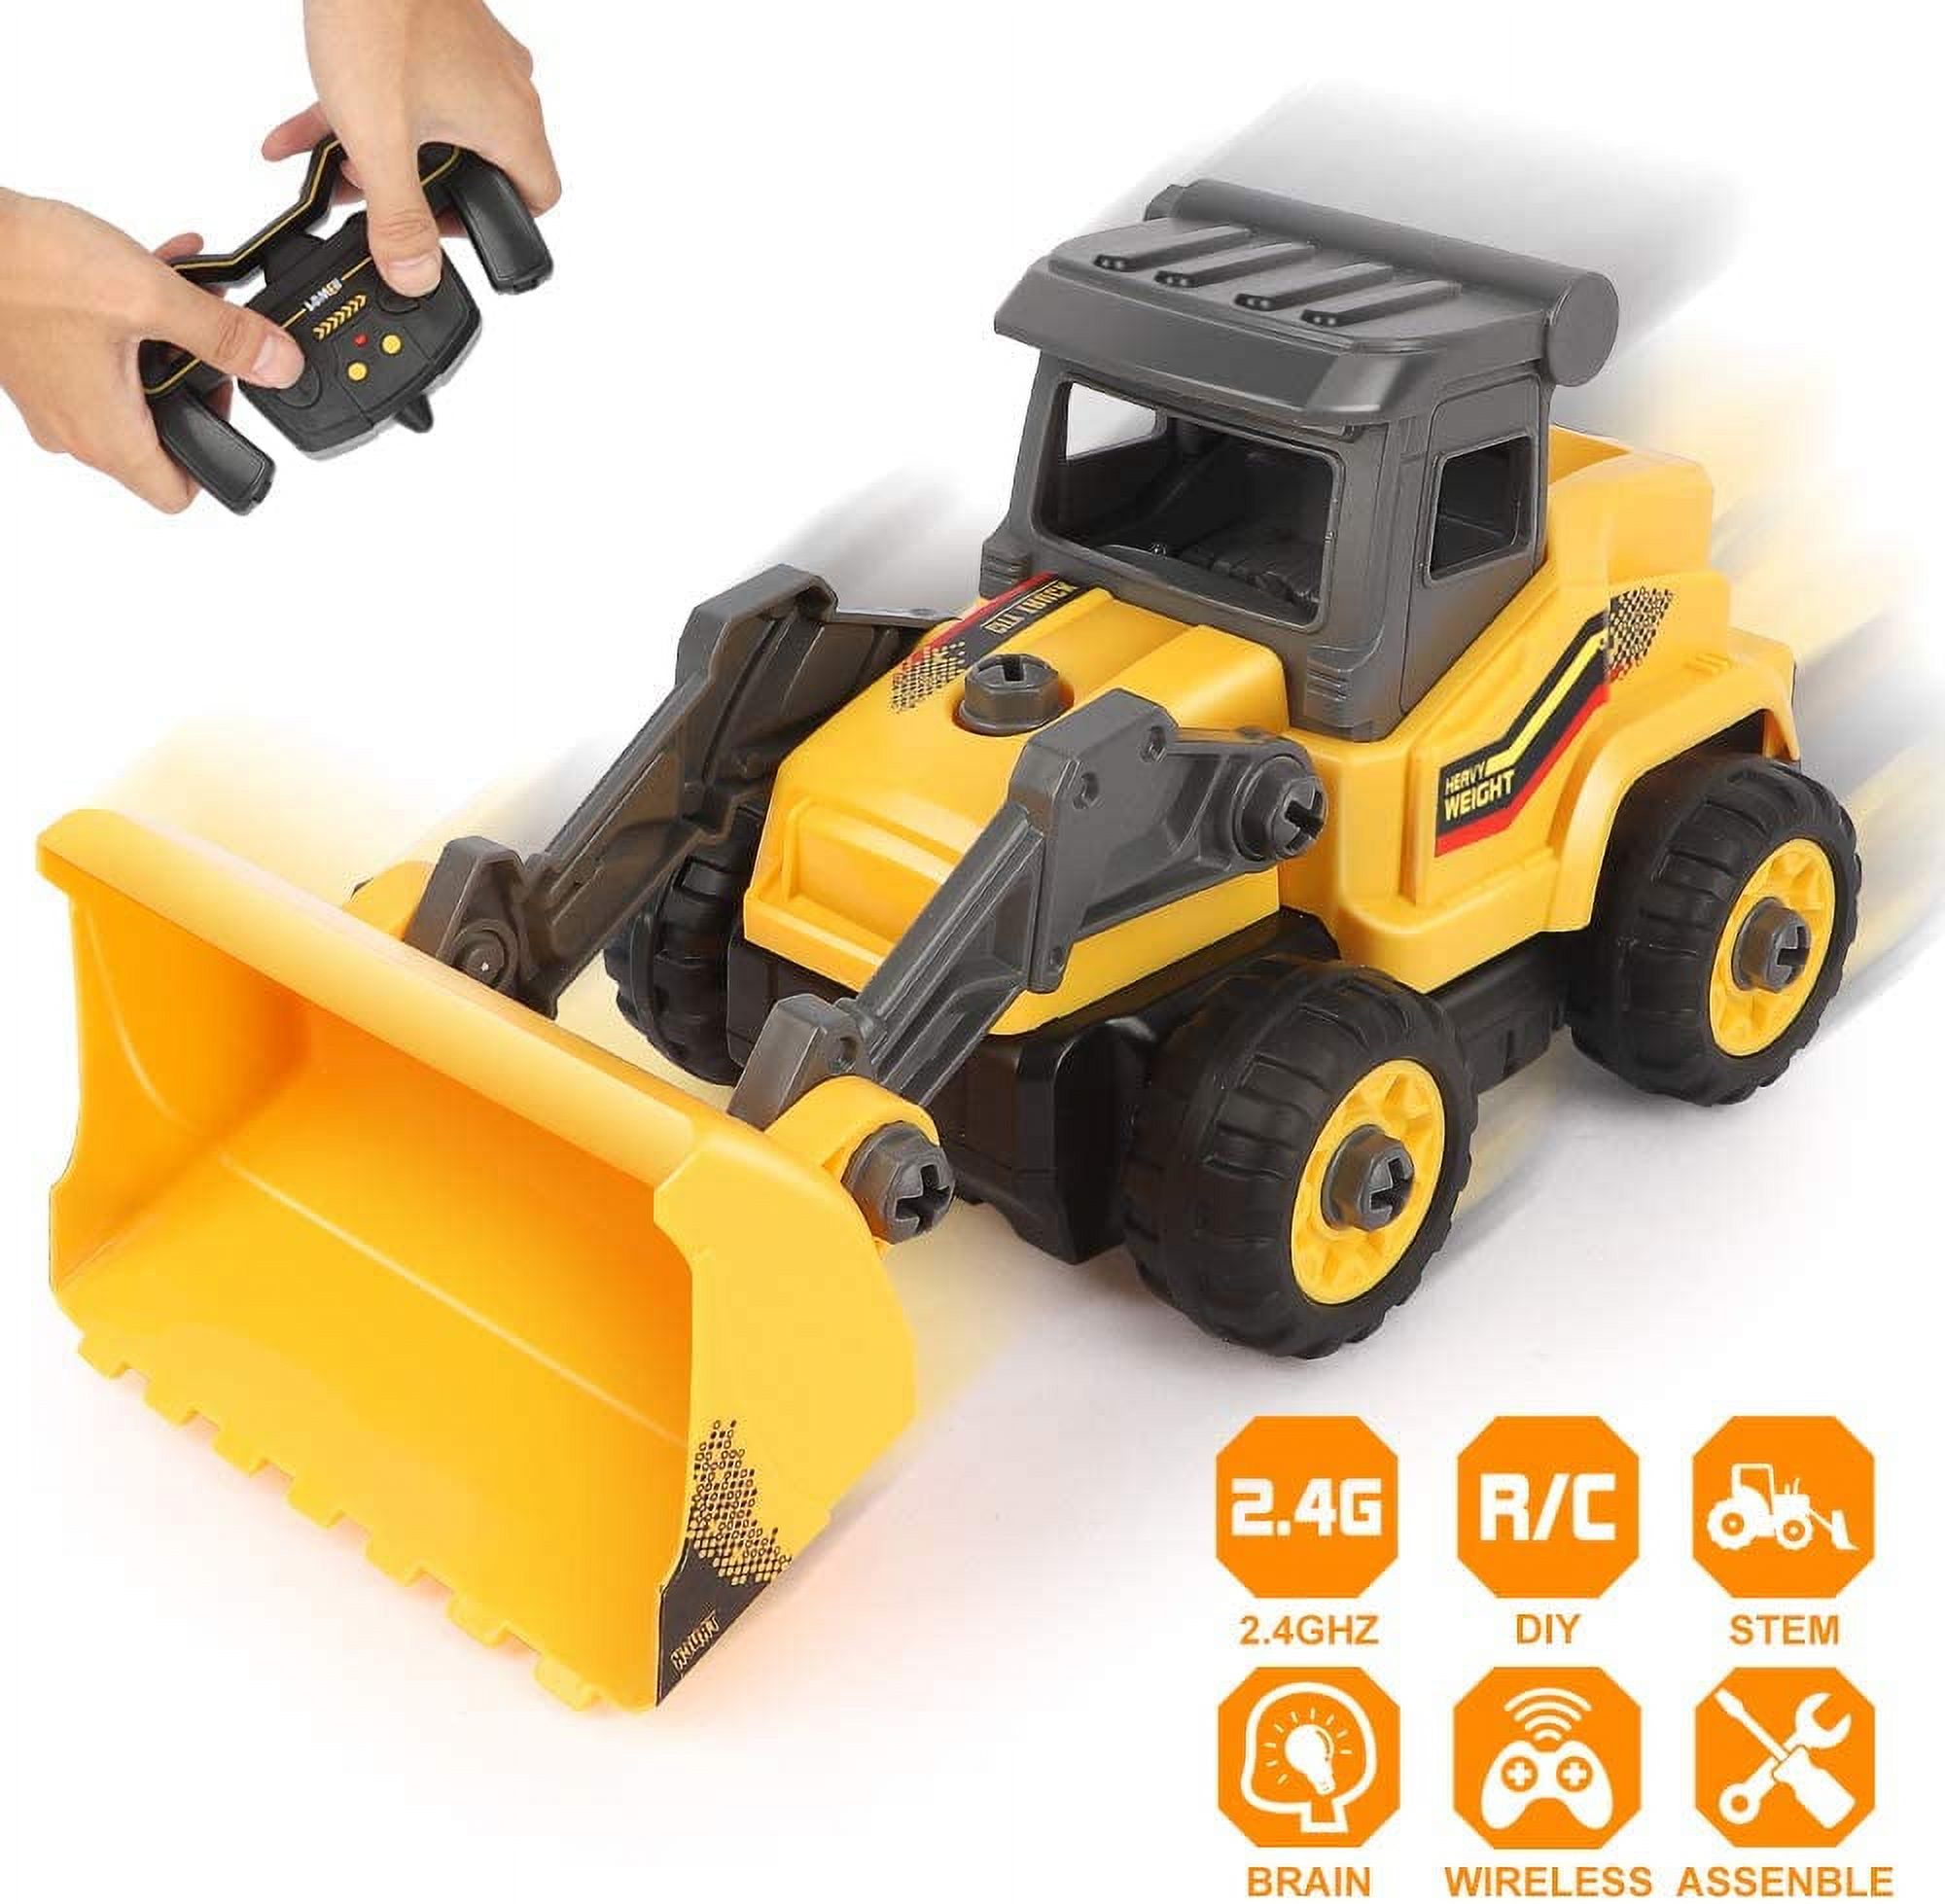 Construction Trucks for Boys - 2 in 1 RC Construction Vehicles - Take Apart Construction Toys - Remote Control Excavator and Bulldozer Toys for Boys, Gift for 3 4 5 6 7 Year Old Boy & Kid - image 3 of 8